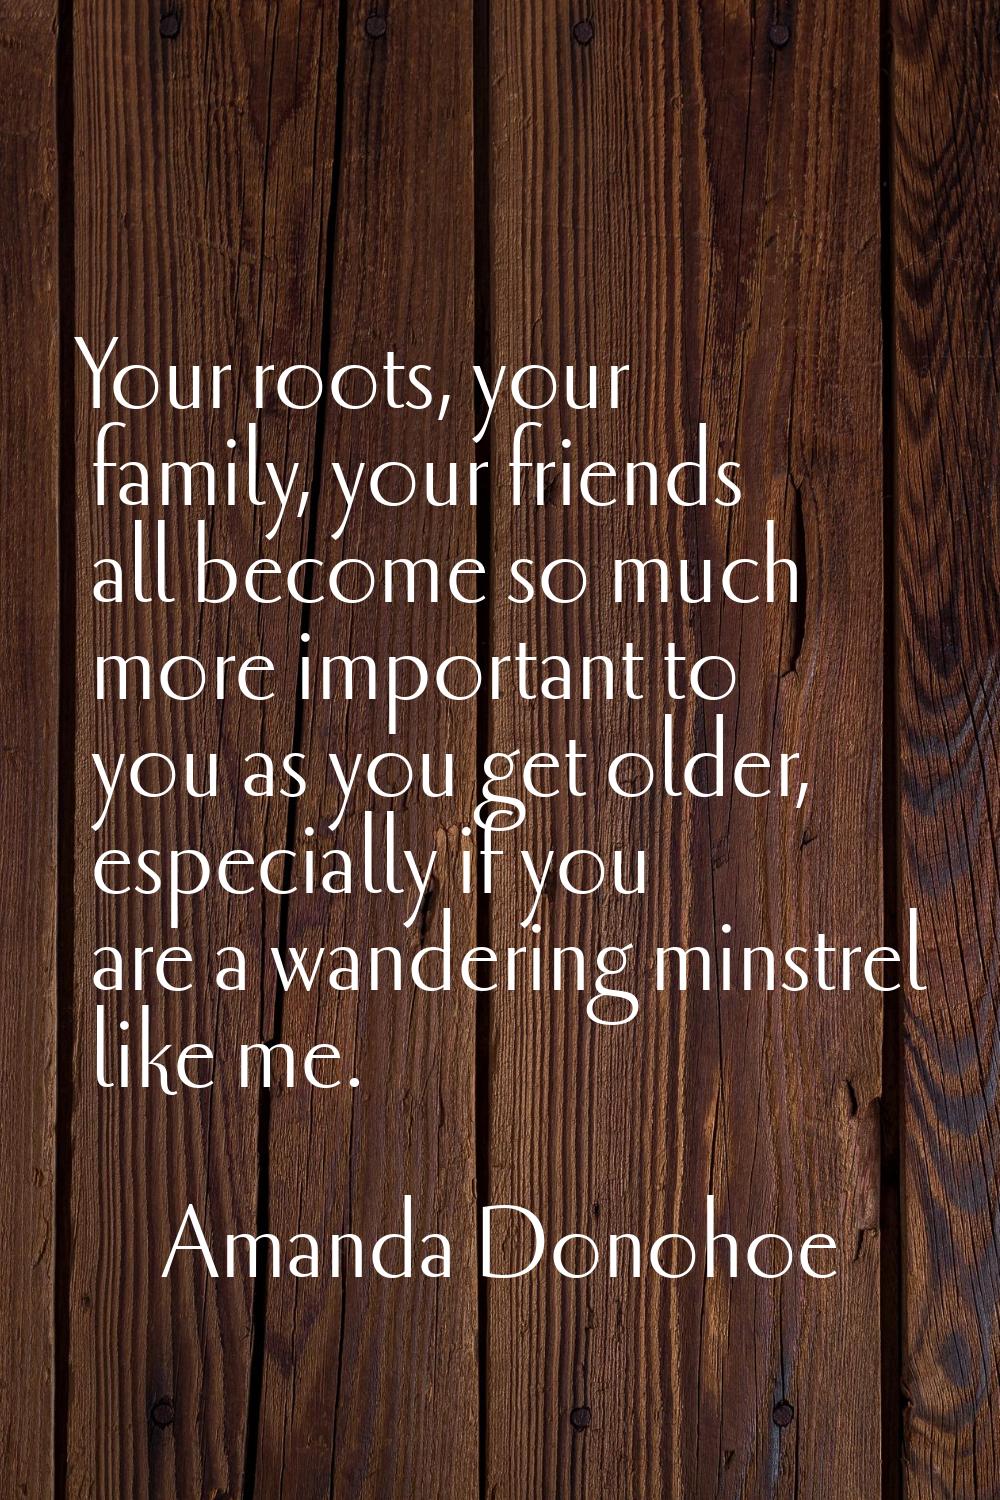 Your roots, your family, your friends all become so much more important to you as you get older, es